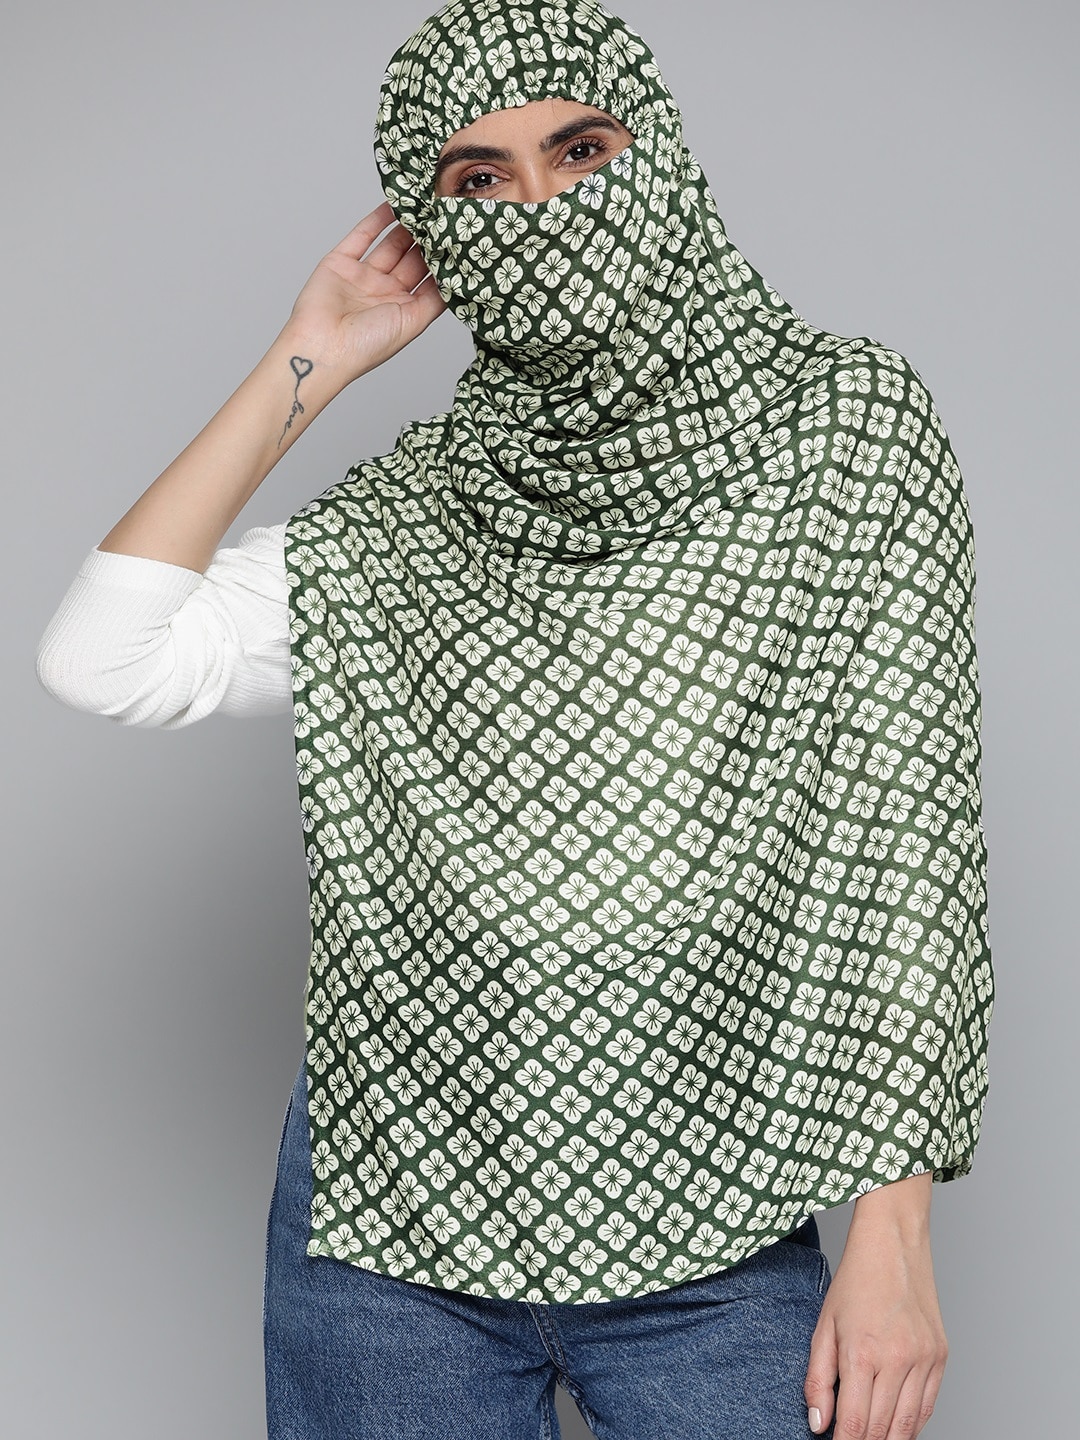 Mast & Harbour Women Green & White Printed Biker Scarf Price in India